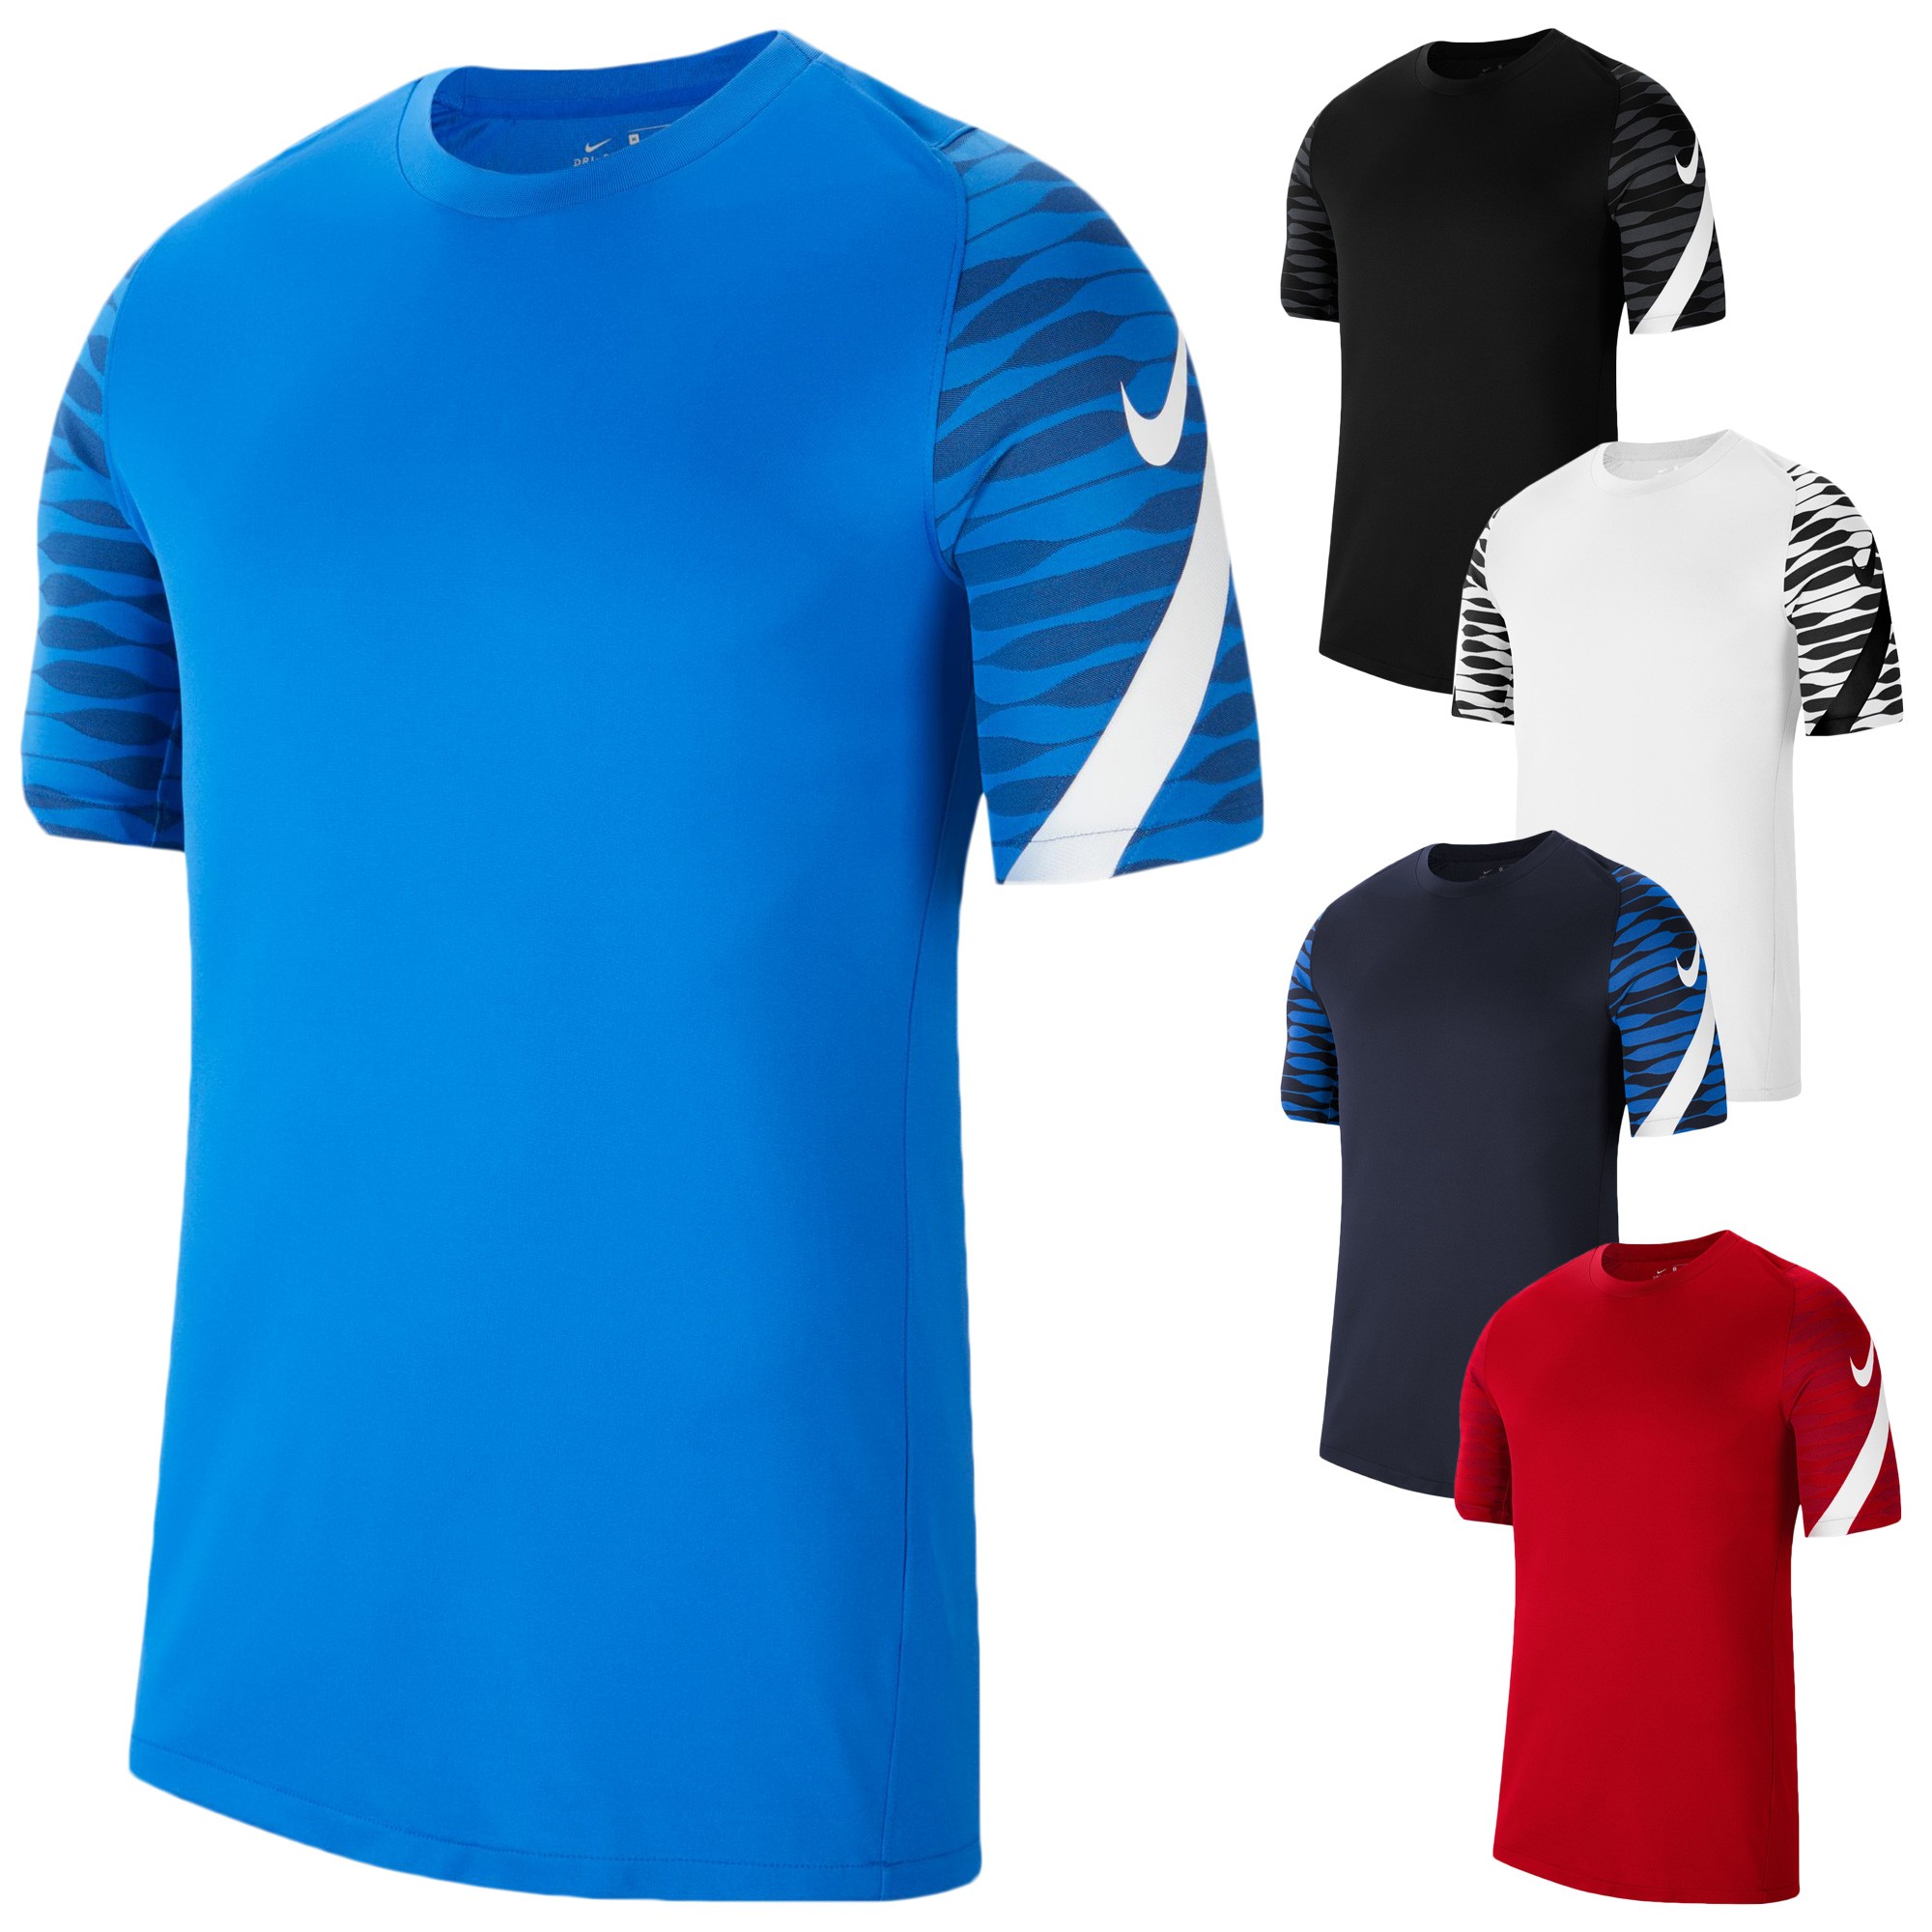 Maillot d'entrainement Nike Strike 21